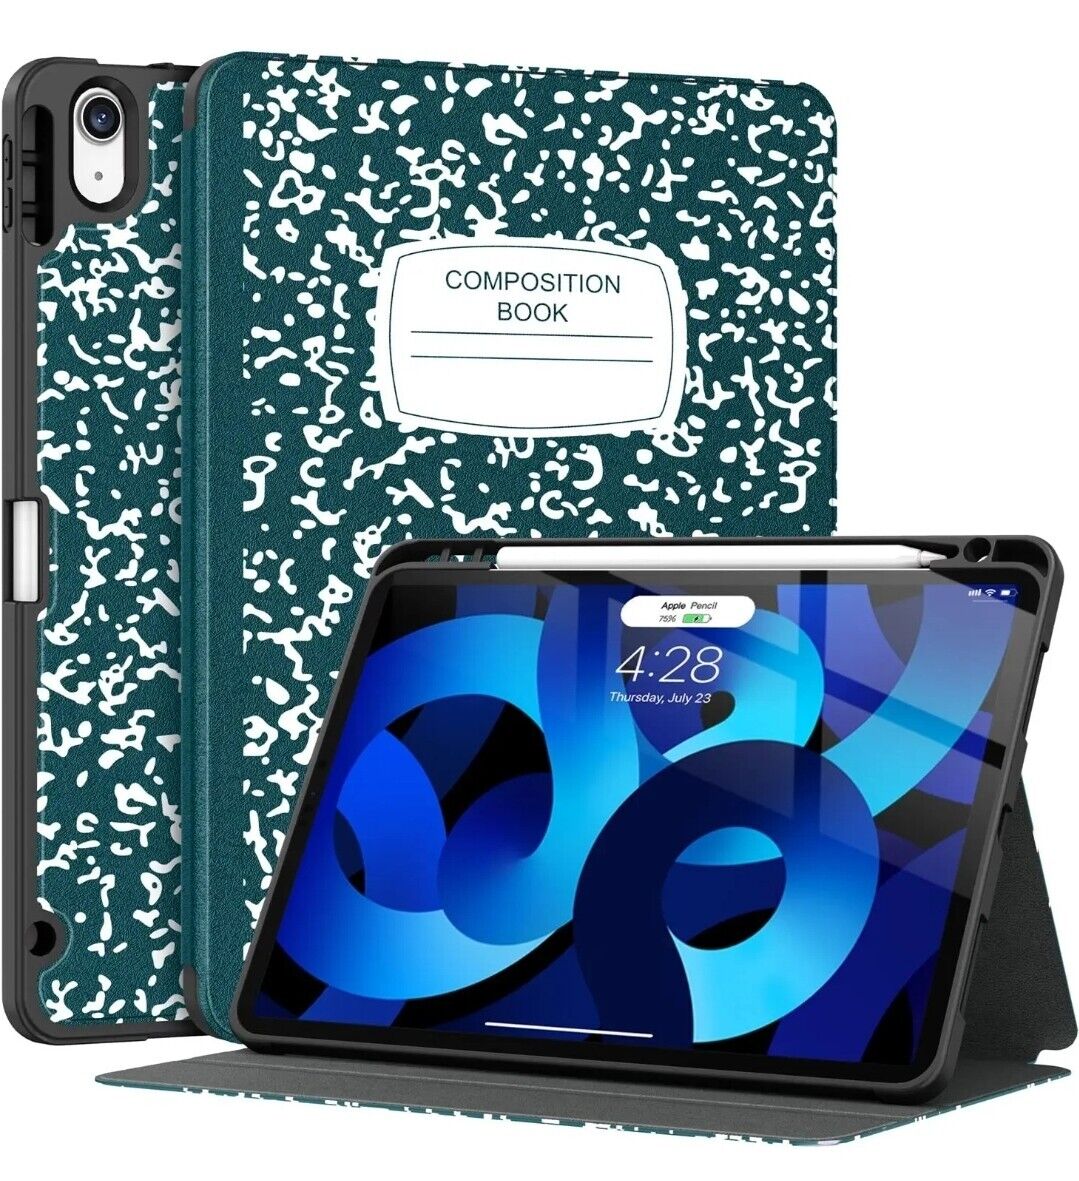 Supveco Case for iPad Air 4 & 5 with Pencil Holder Auto Wake/Sleep Teal NEW